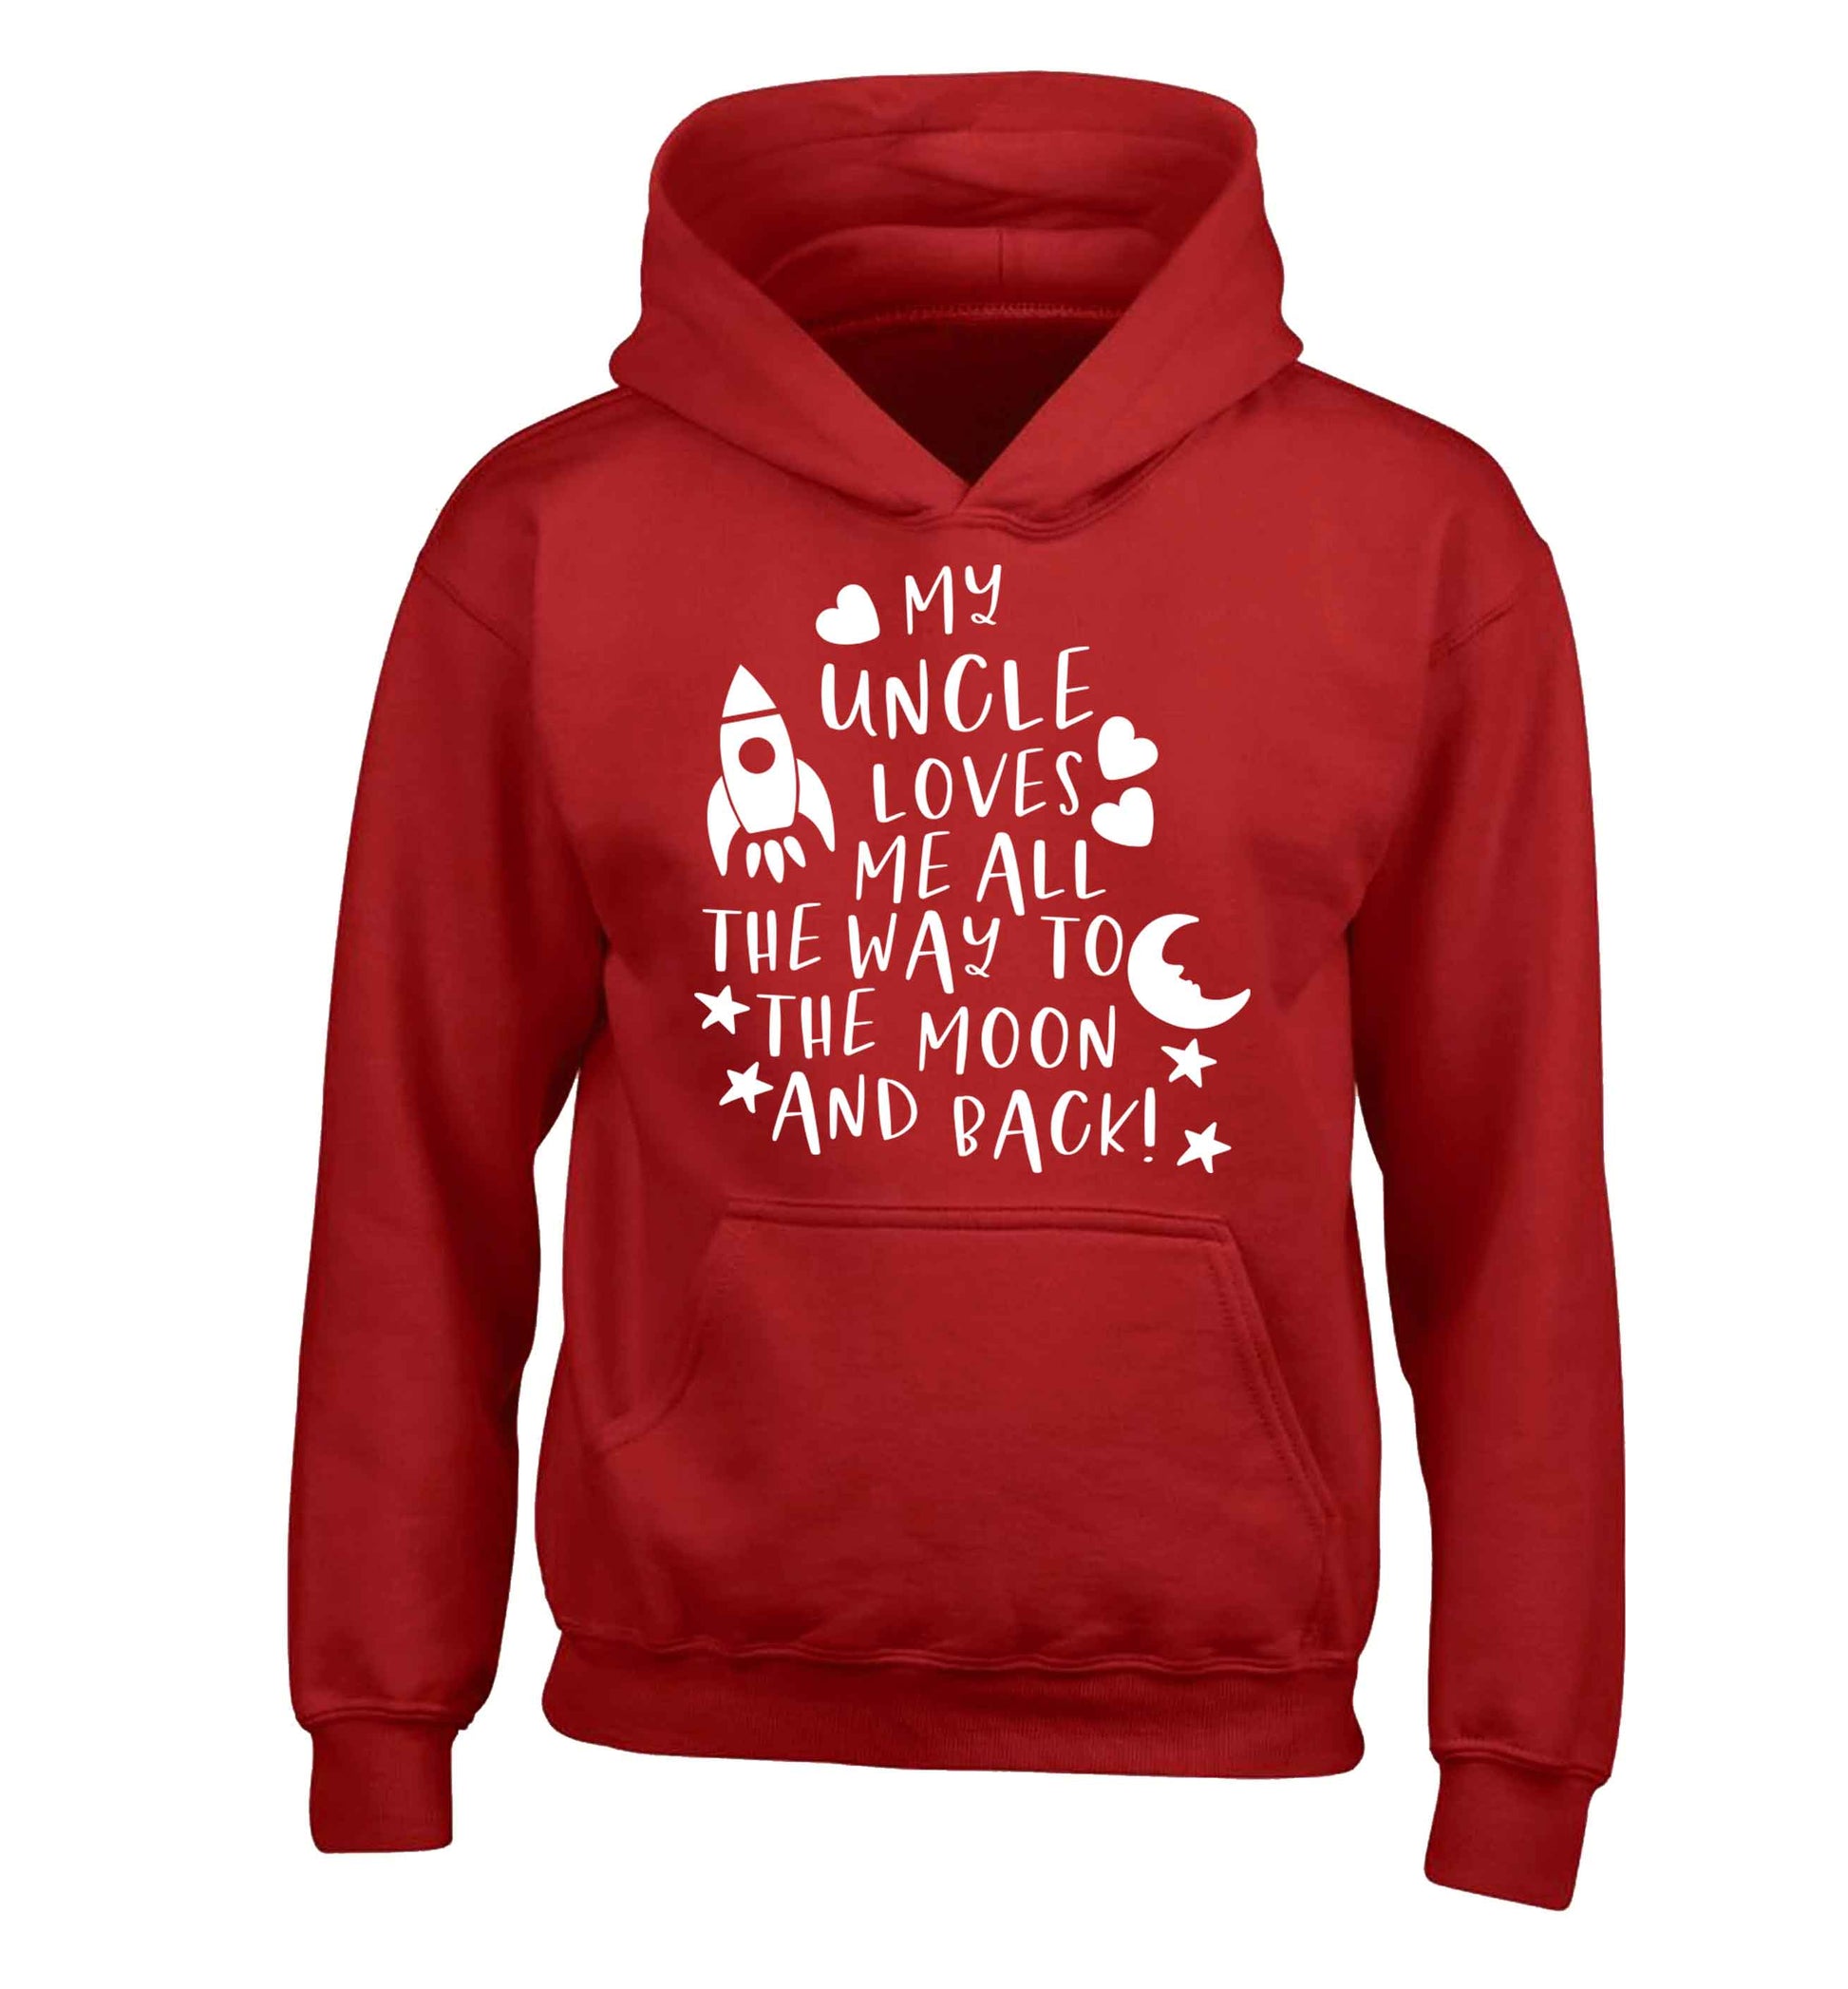 My uncle loves me all the way to the moon and back children's red hoodie 12-13 Years